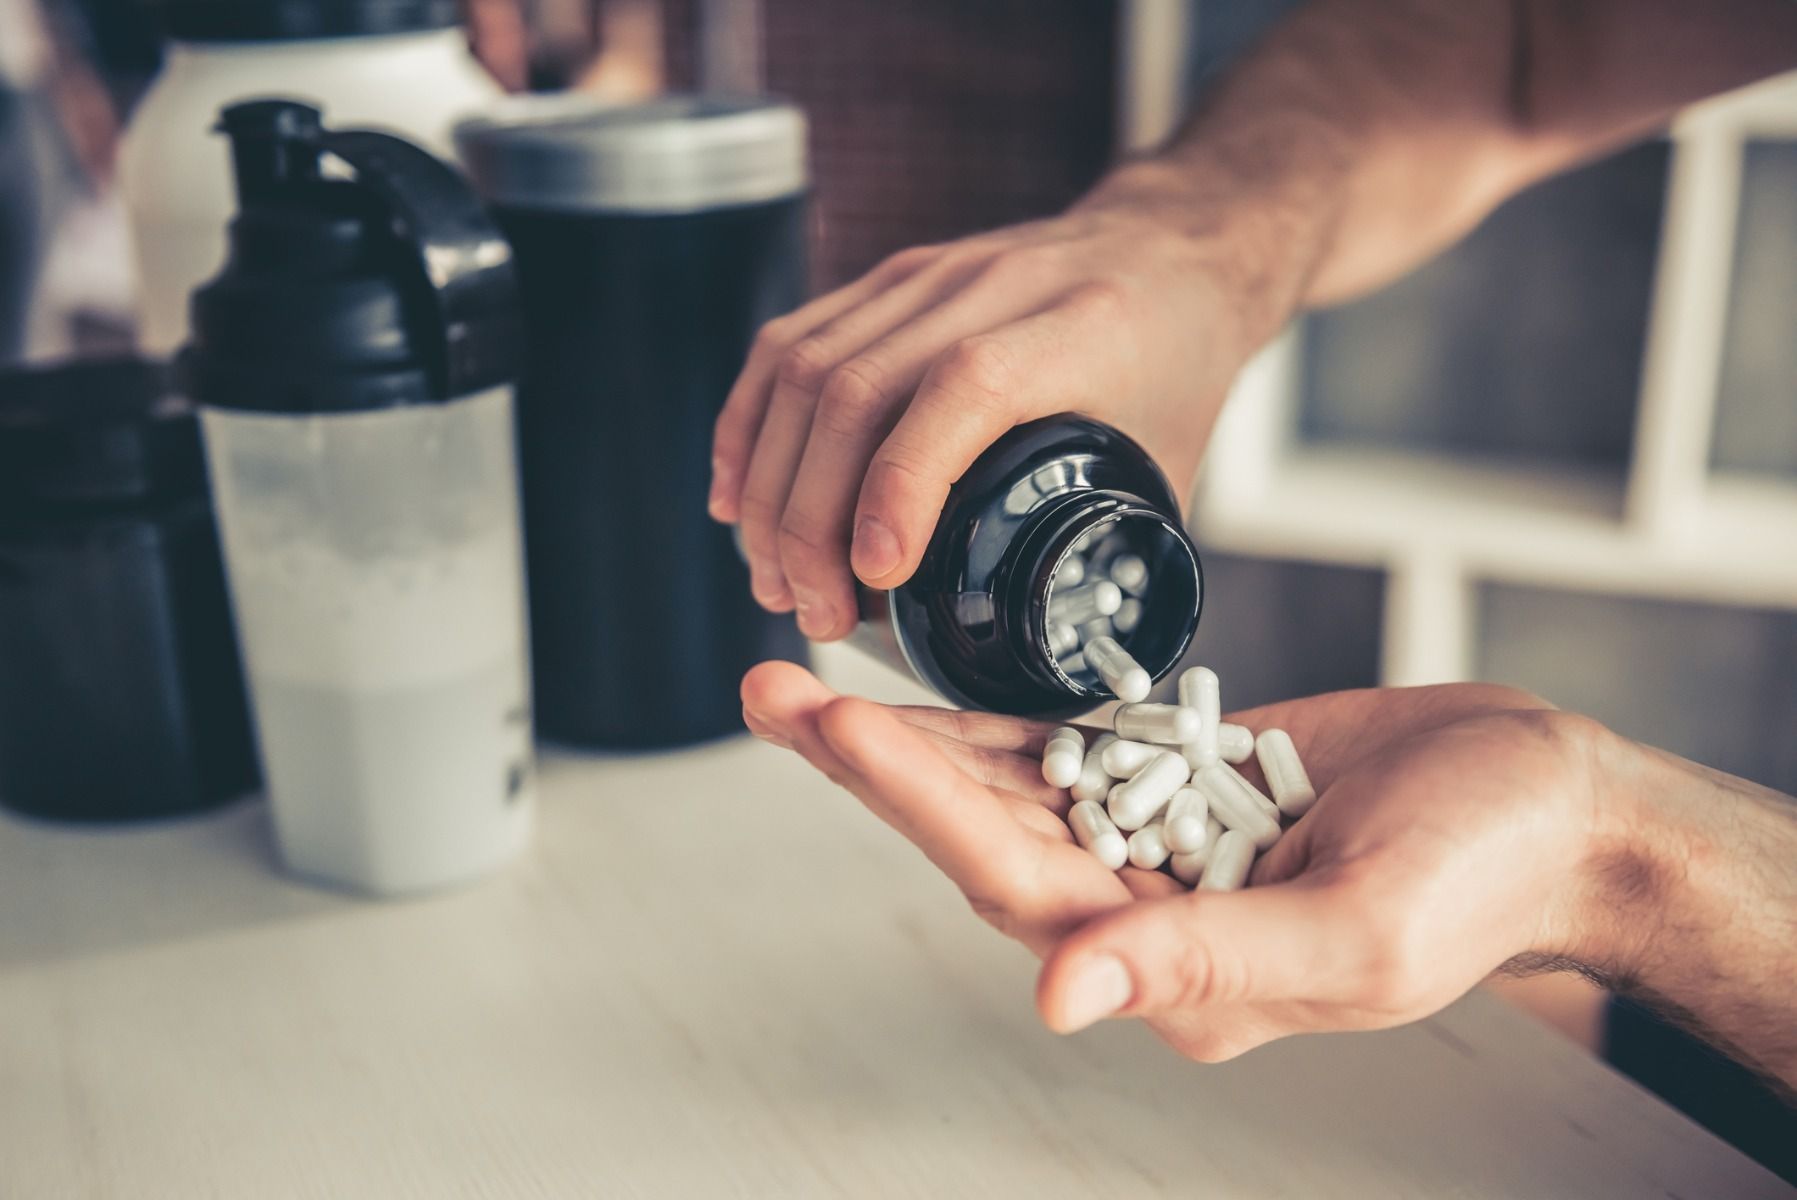 L-Carnitine and its 11 great side effects